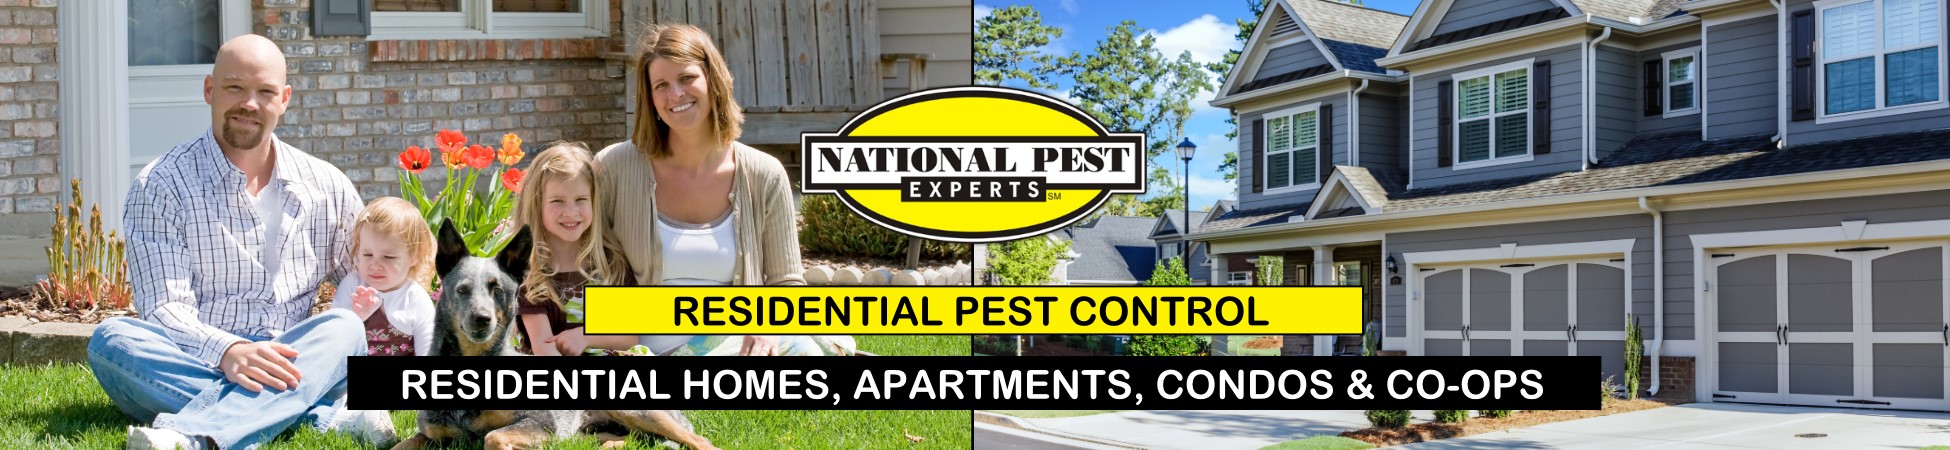 National Pest Experts - Residential exterminating and pest control in Holbrook, NY